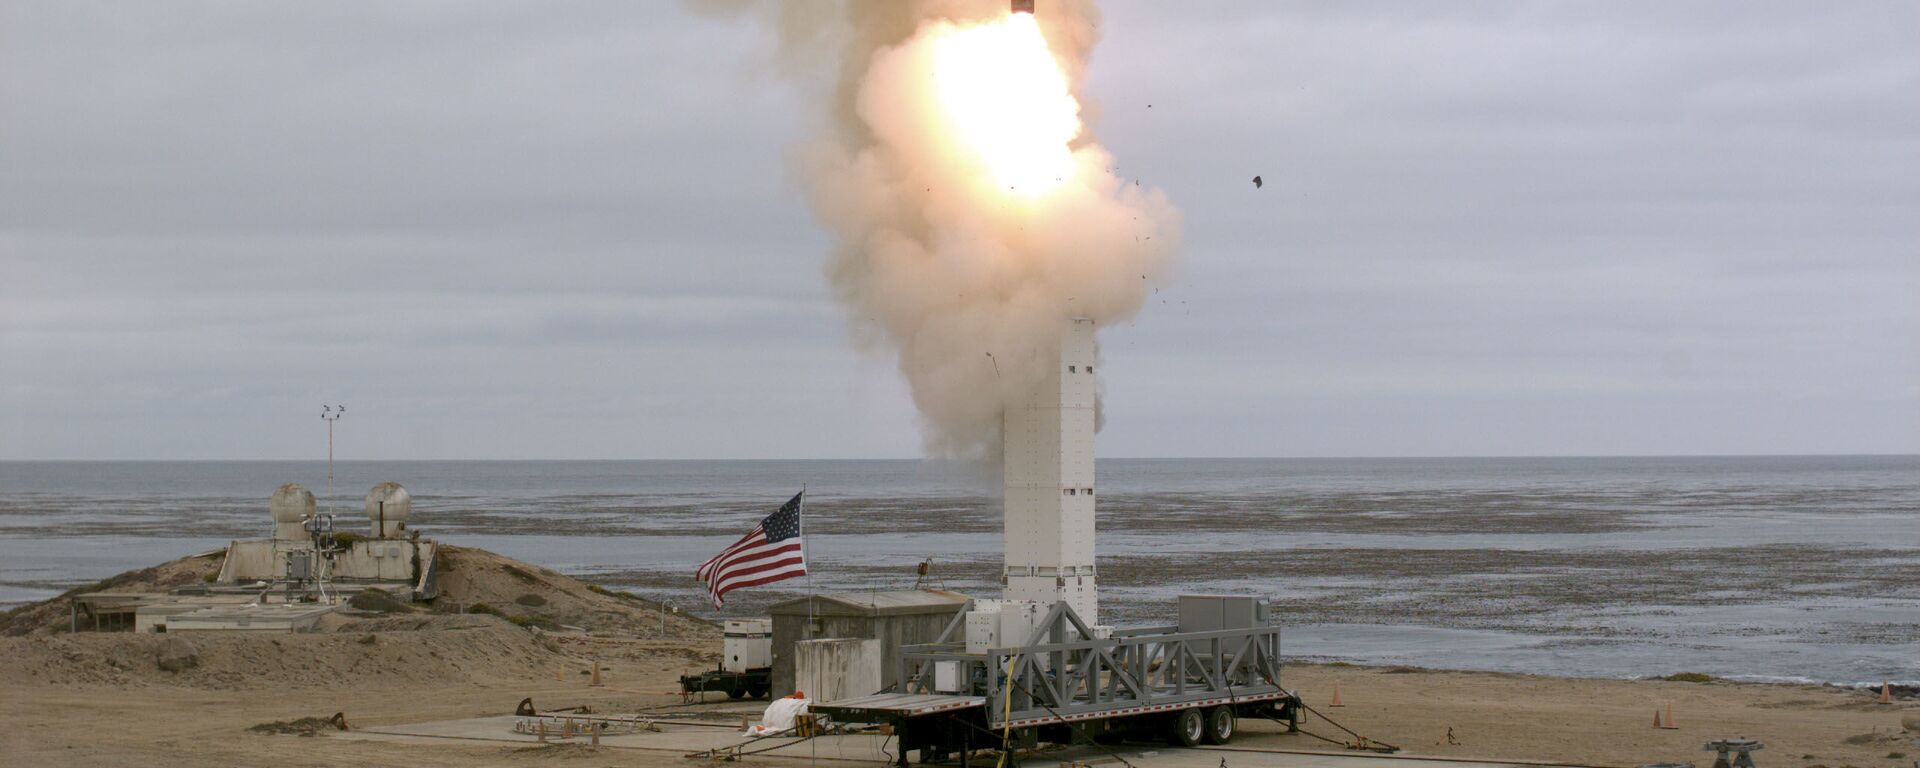 This US Department of Defense (DOD) handout photo shows on August 18, at 2:30 p.m. Pacific Daylight Time, when the Defense Department conducted a flight test of a conventionally configured ground-launched cruise missile at San Nicolas Island, California. - The test missile exited its ground mobile launcher and accurately impacted its target after more than 500 kilometers of flight. Data collected and lessons learned from this test will inform DOD's development of future intermediate-range capabilities.  - Sputnik International, 1920, 13.06.2021